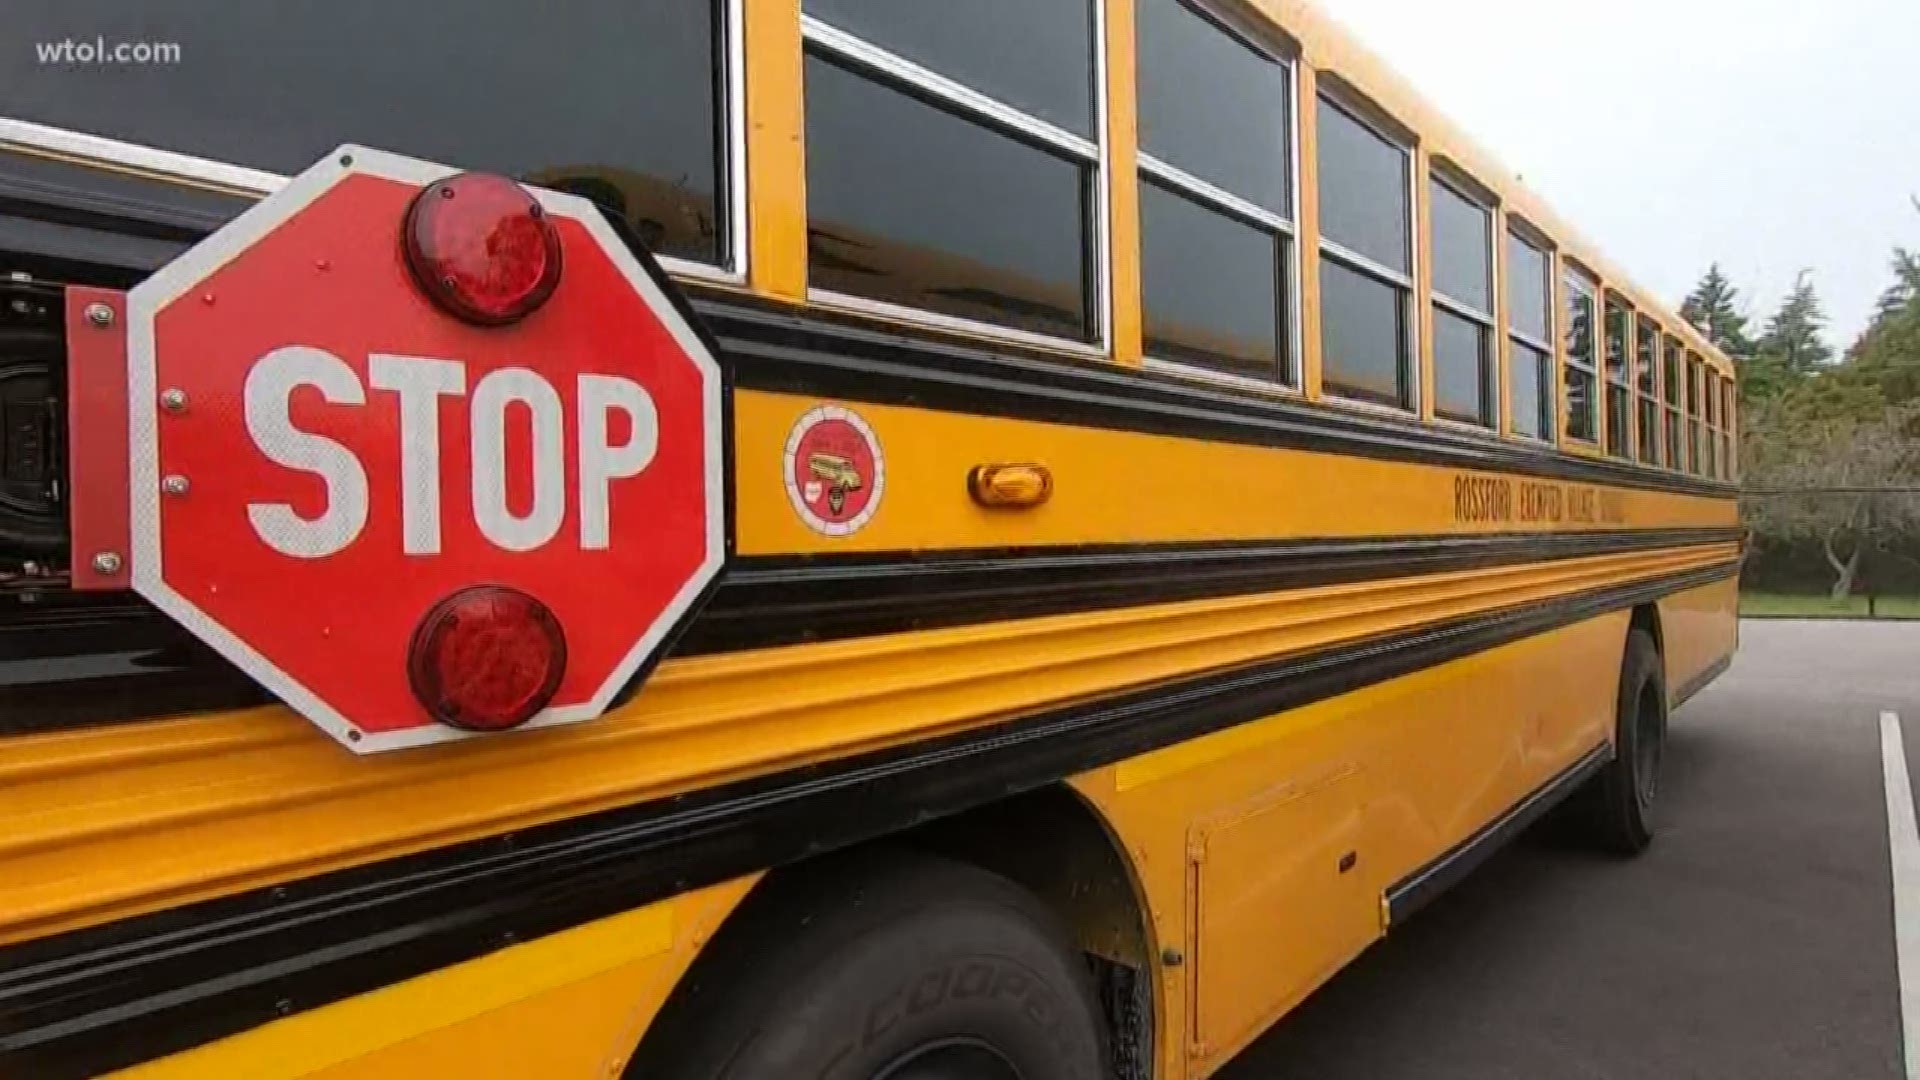 "Operation Big Bird" puts officers on school buses to take down license plate numbers of drivers who don't stop for school buses.